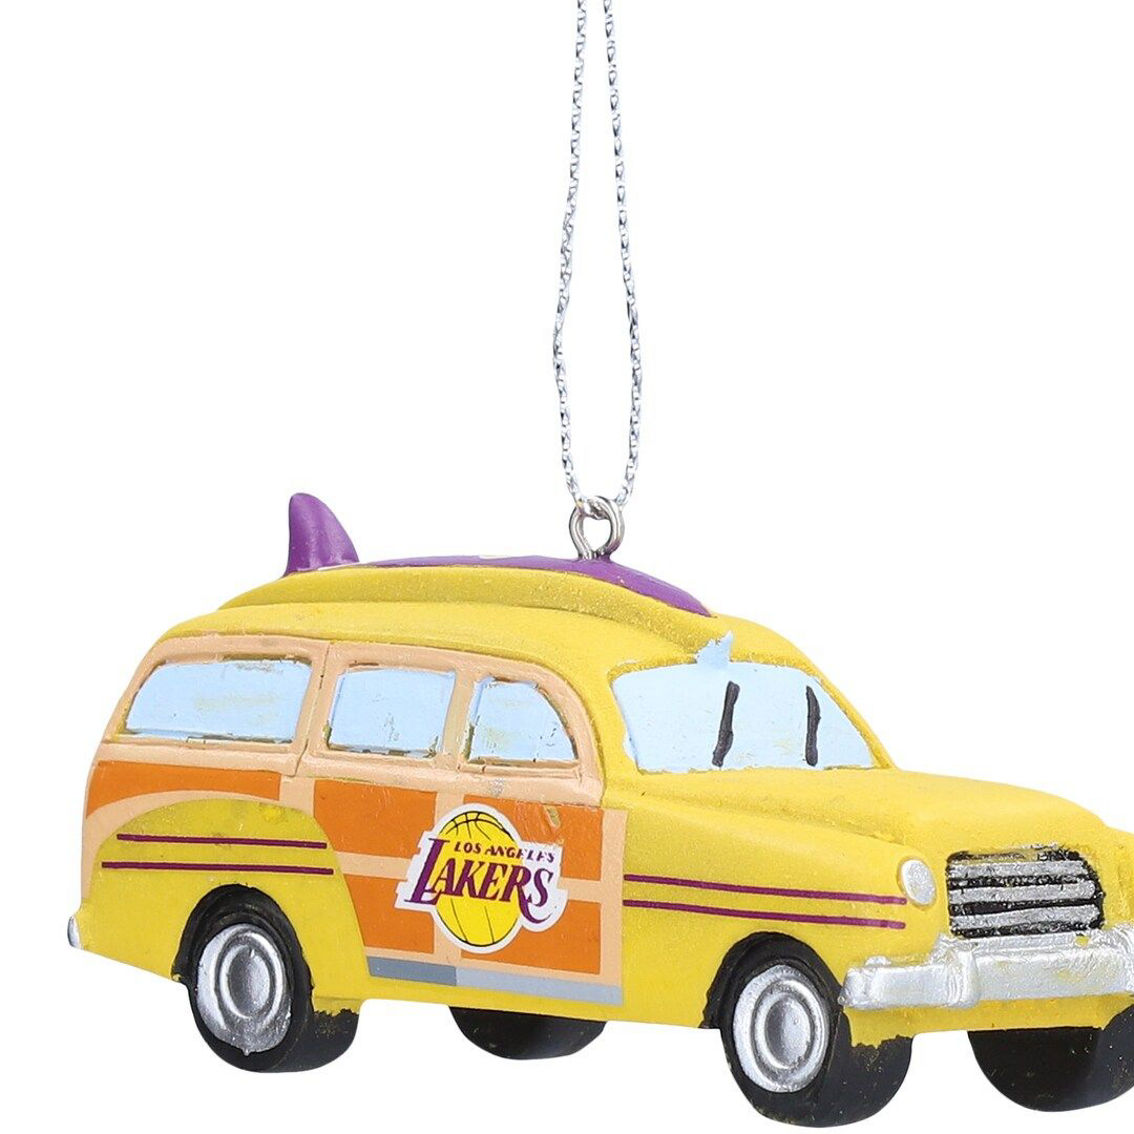 FOCO Los Angeles Lakers Station Wagon Ornament - Image 2 of 2